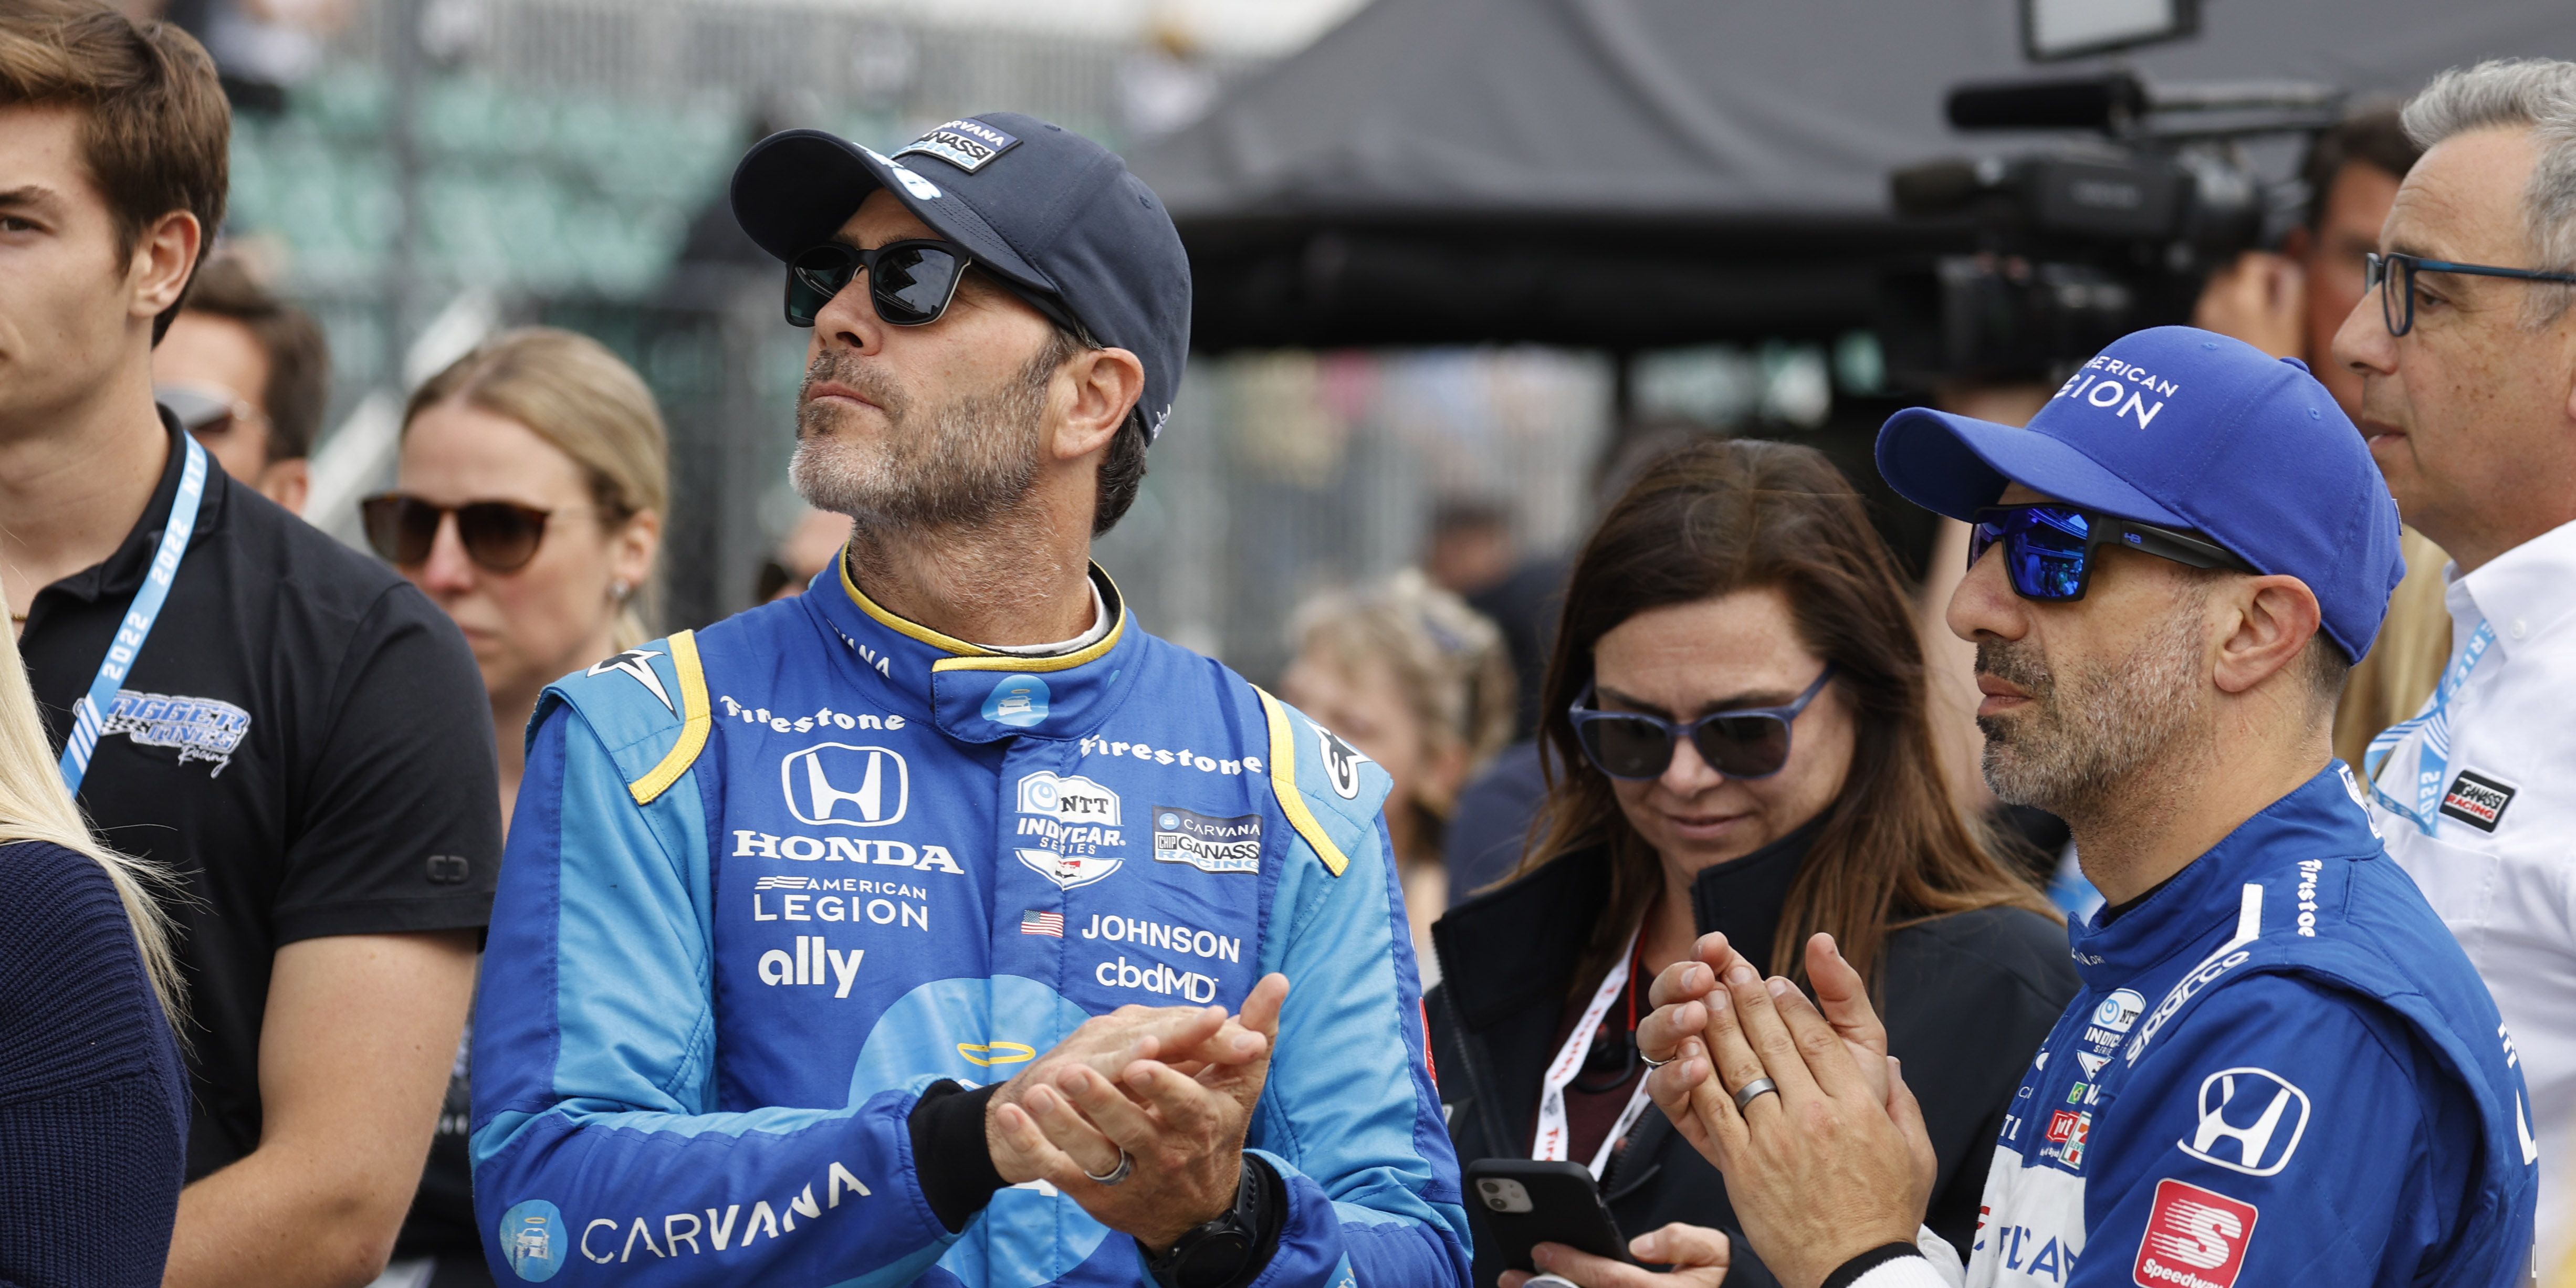 Jimmie Johnson is Stepping Away From Full-Time IndyCar Racing